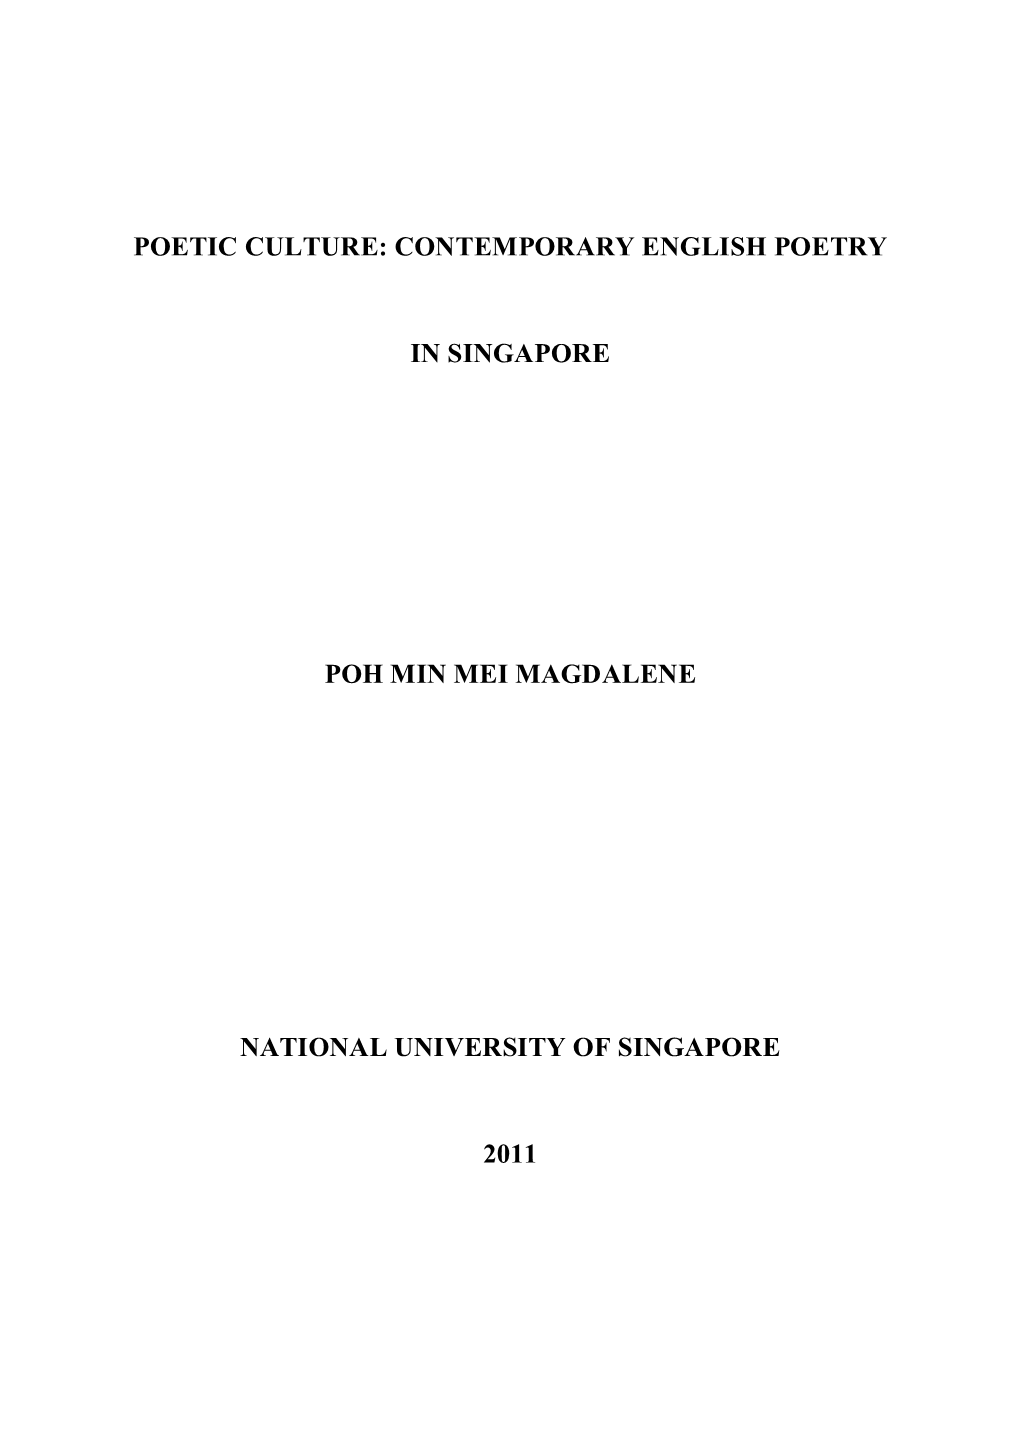 Poetic Culture: Contemporary English Poetry